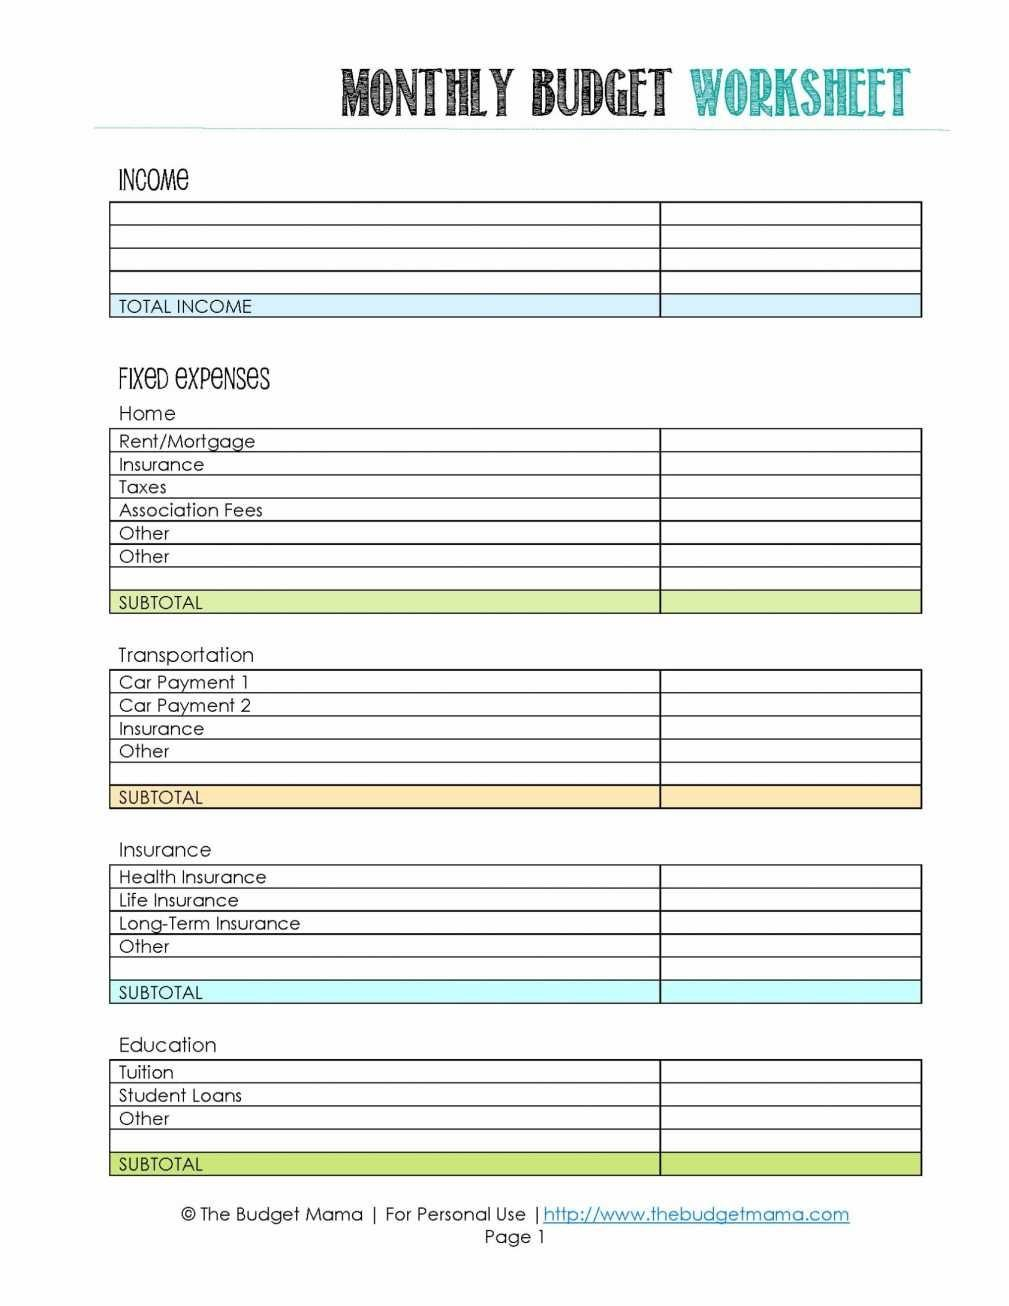 Rental Expenses Spreadsheet Income And Expense Worksheet Business In Also Auto Expense Worksheet 2019